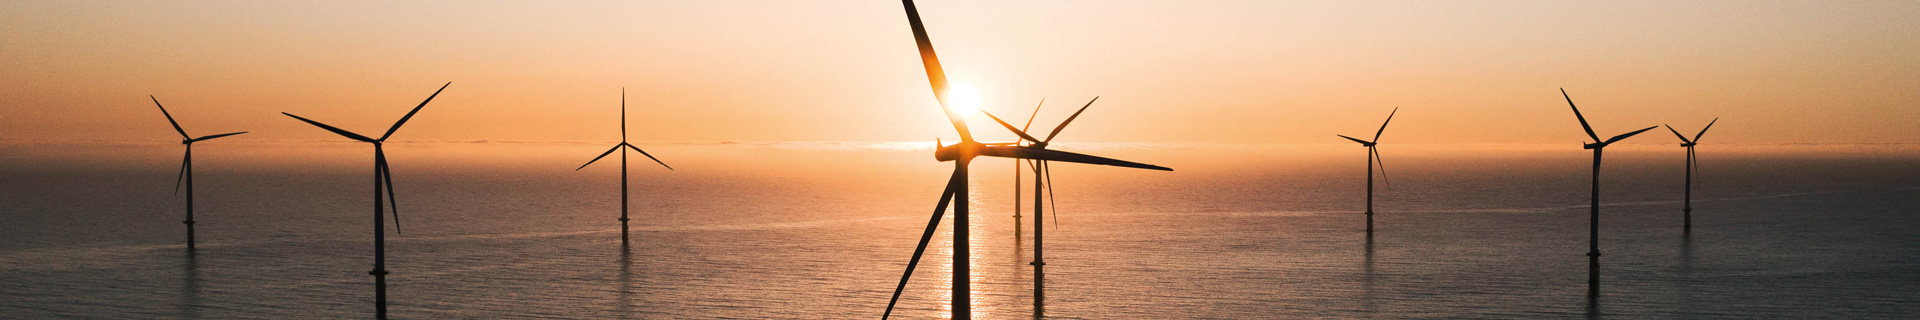 Offshore wind and risk management: opportunities and unchartered waters 